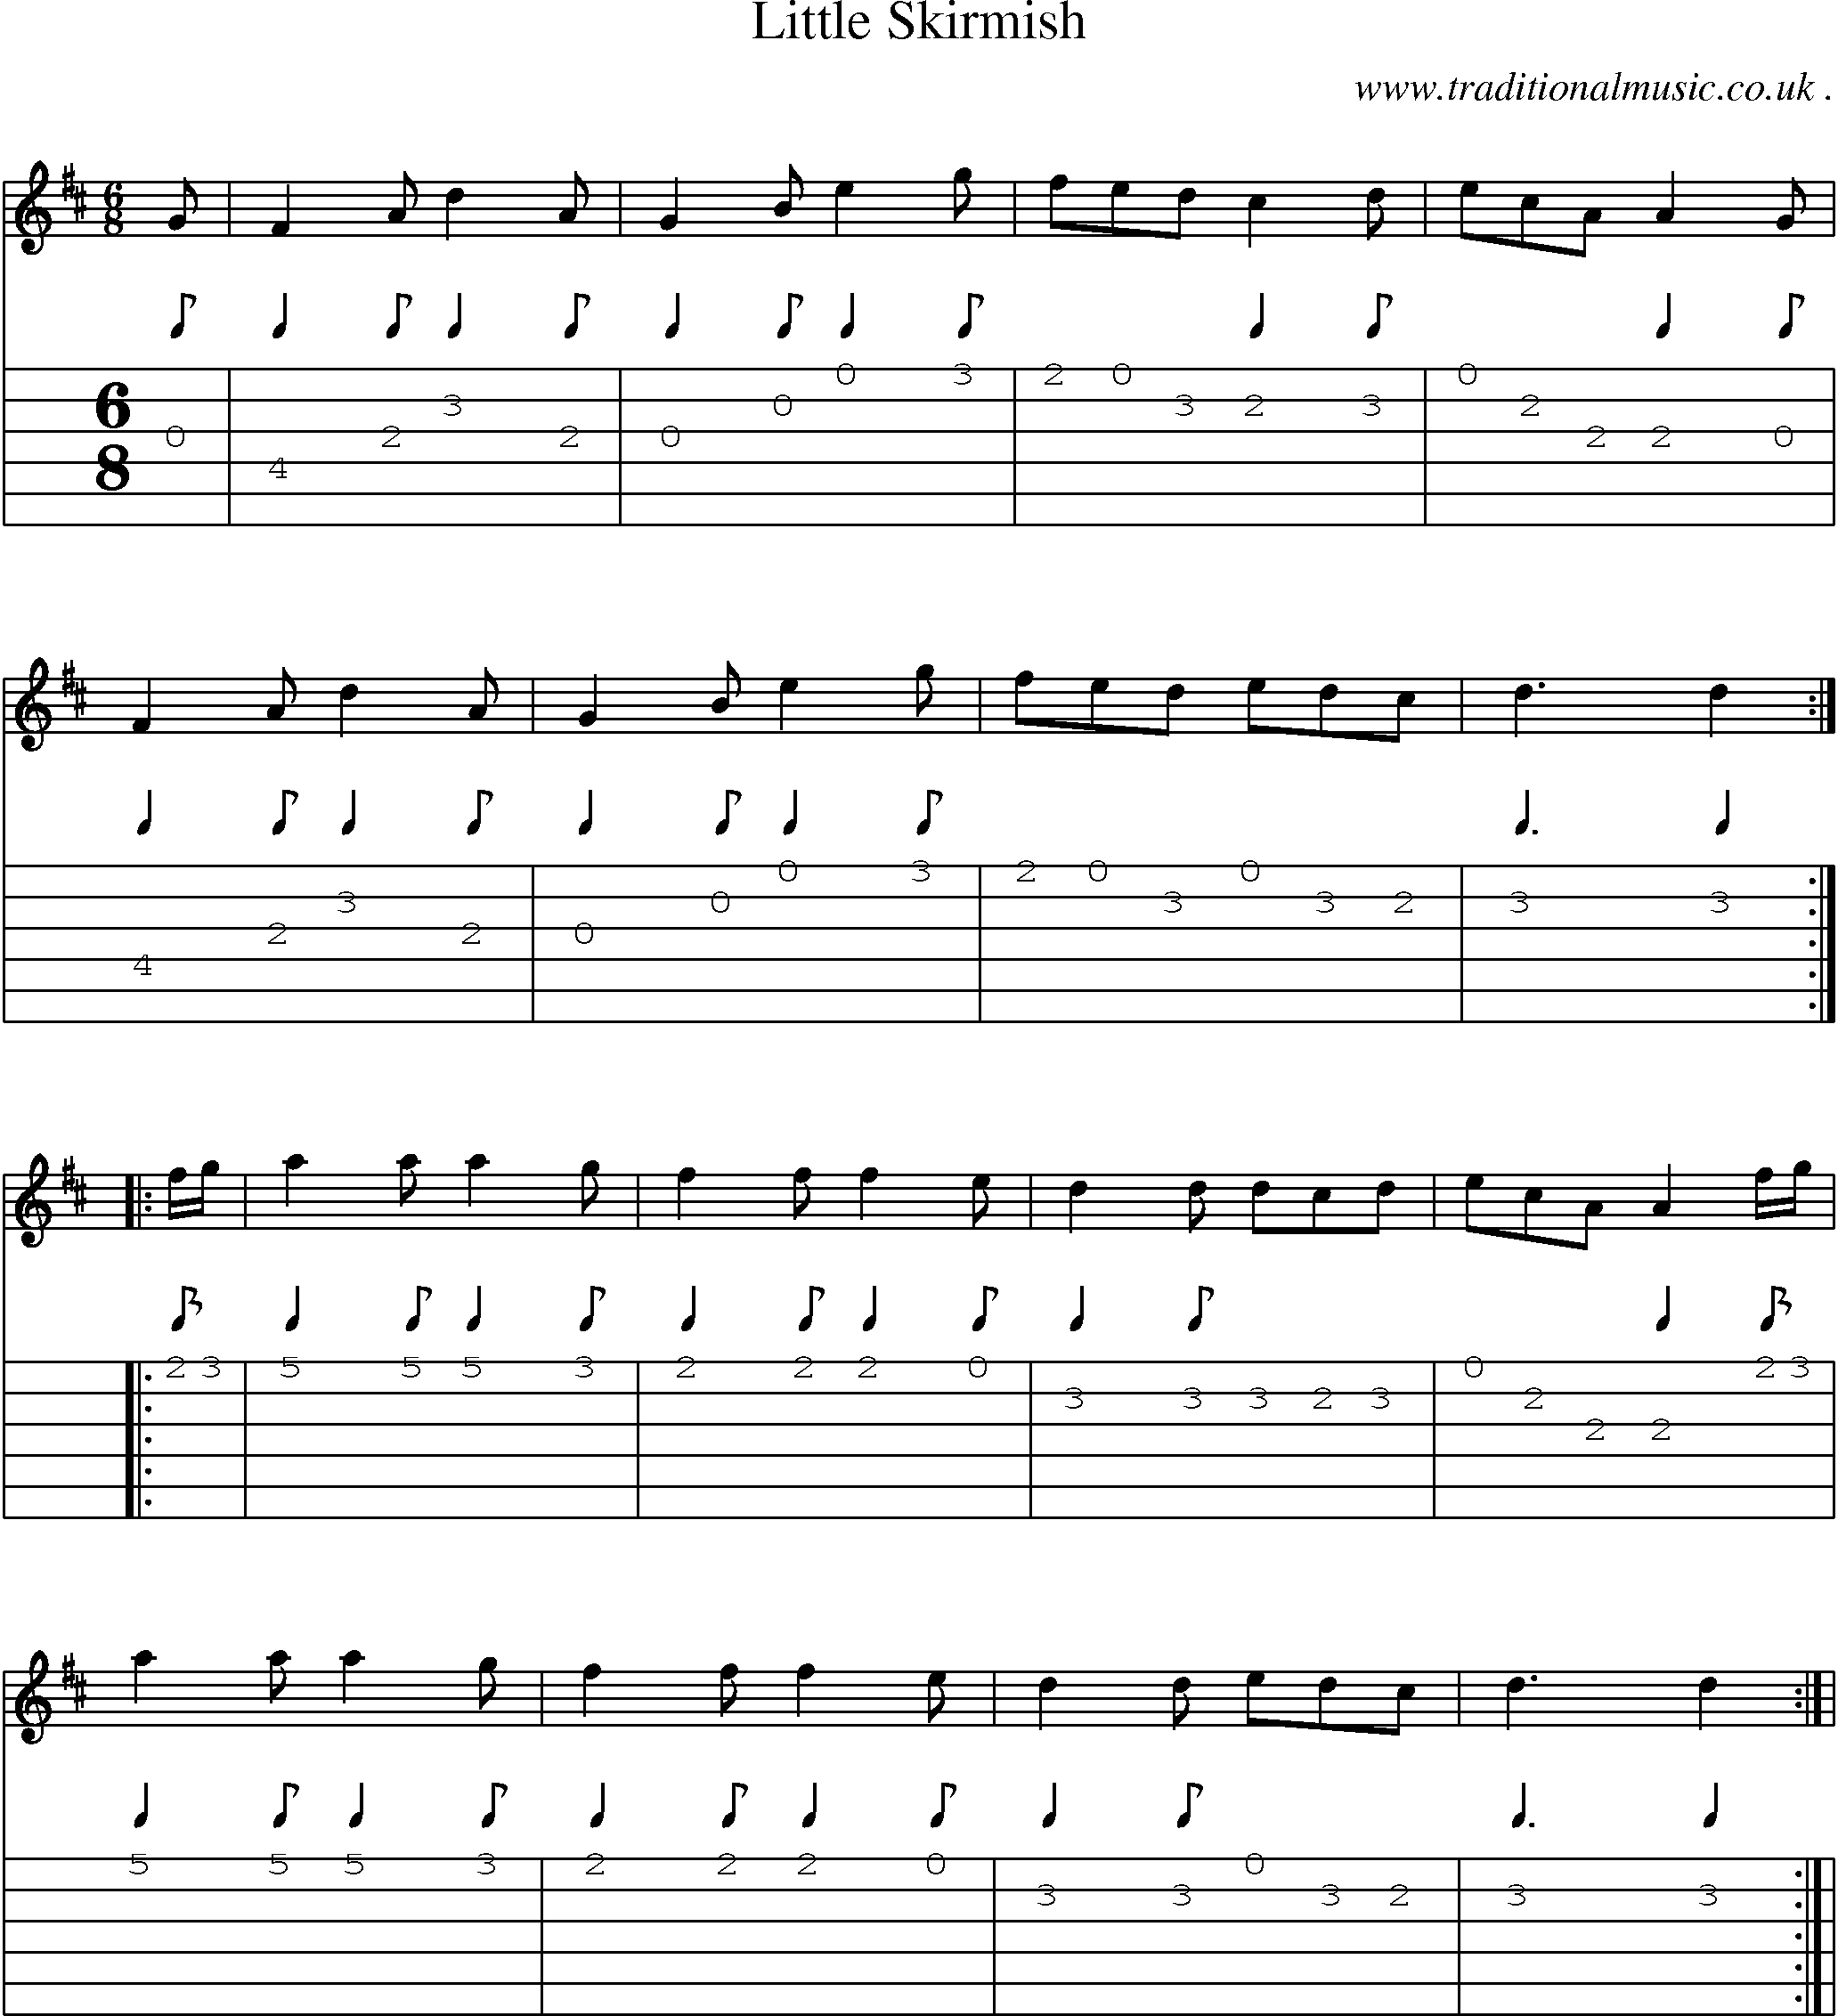 Sheet-Music and Guitar Tabs for Little Skirmish